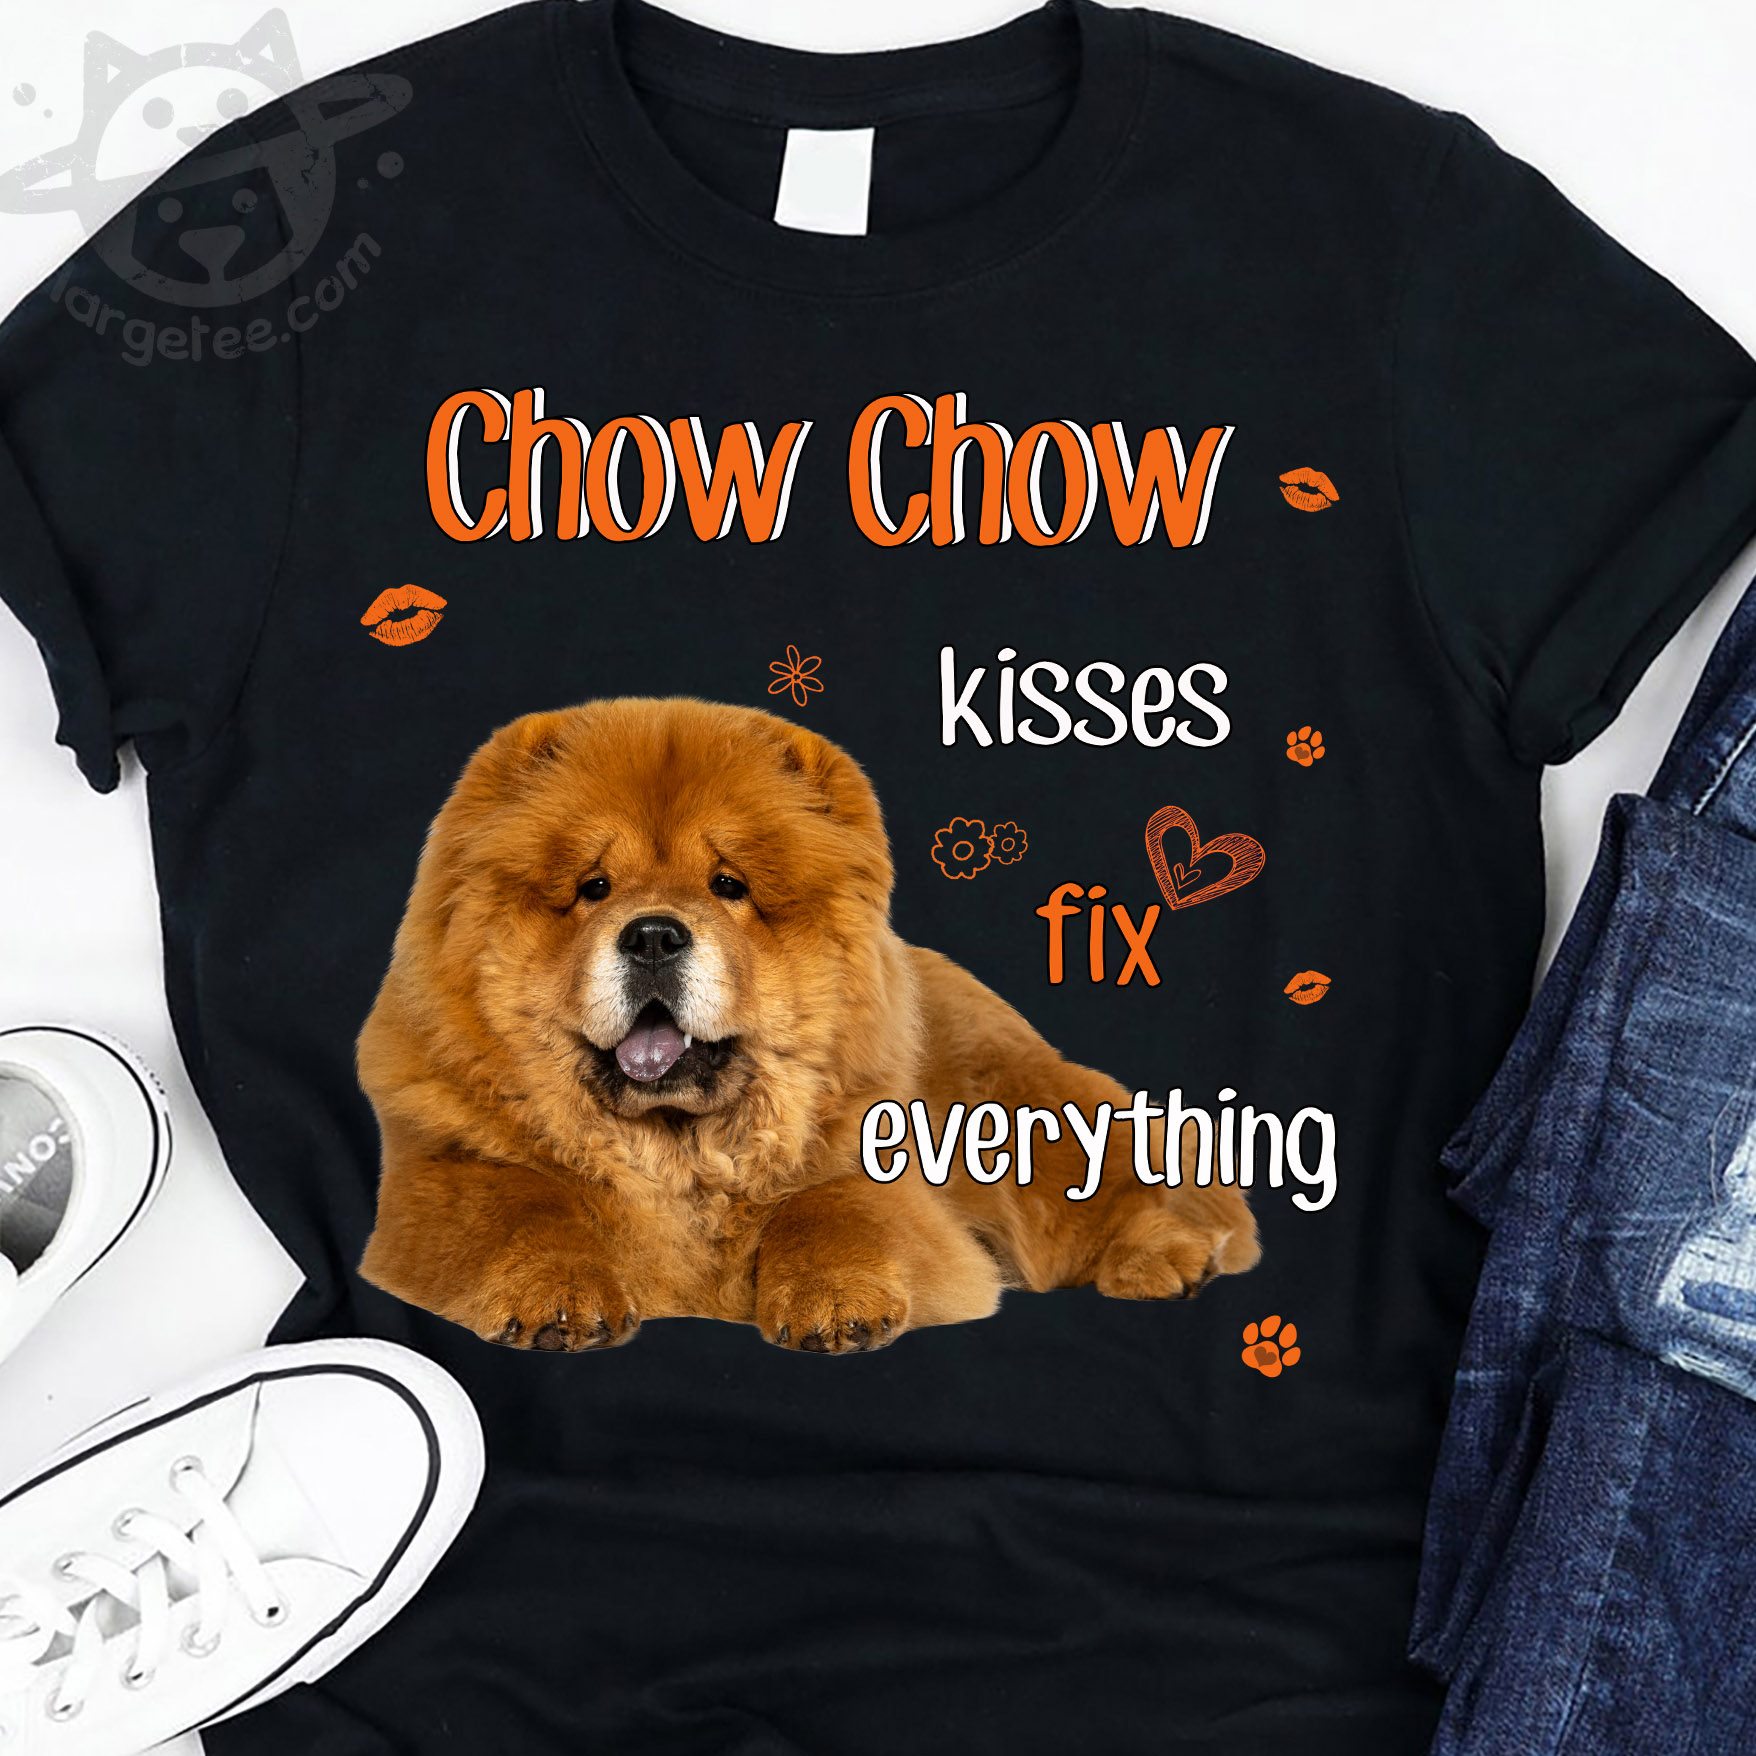 Chow chow kisses fix everything